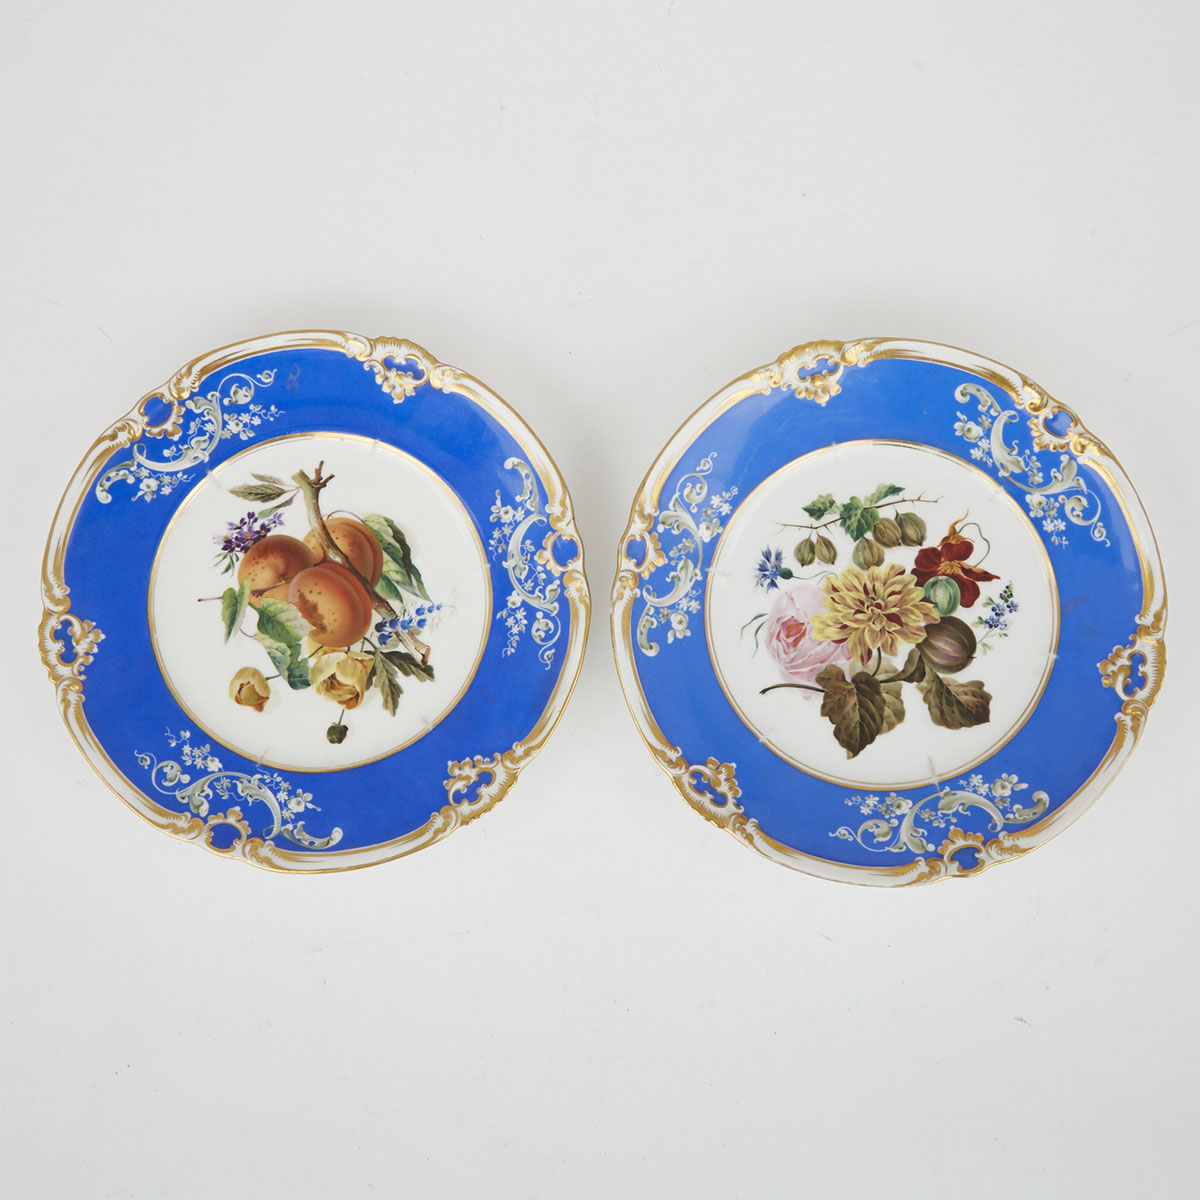 Pair of Gardner Blue Banded Fruit and Floral Centred Dessert Plates, 19th century